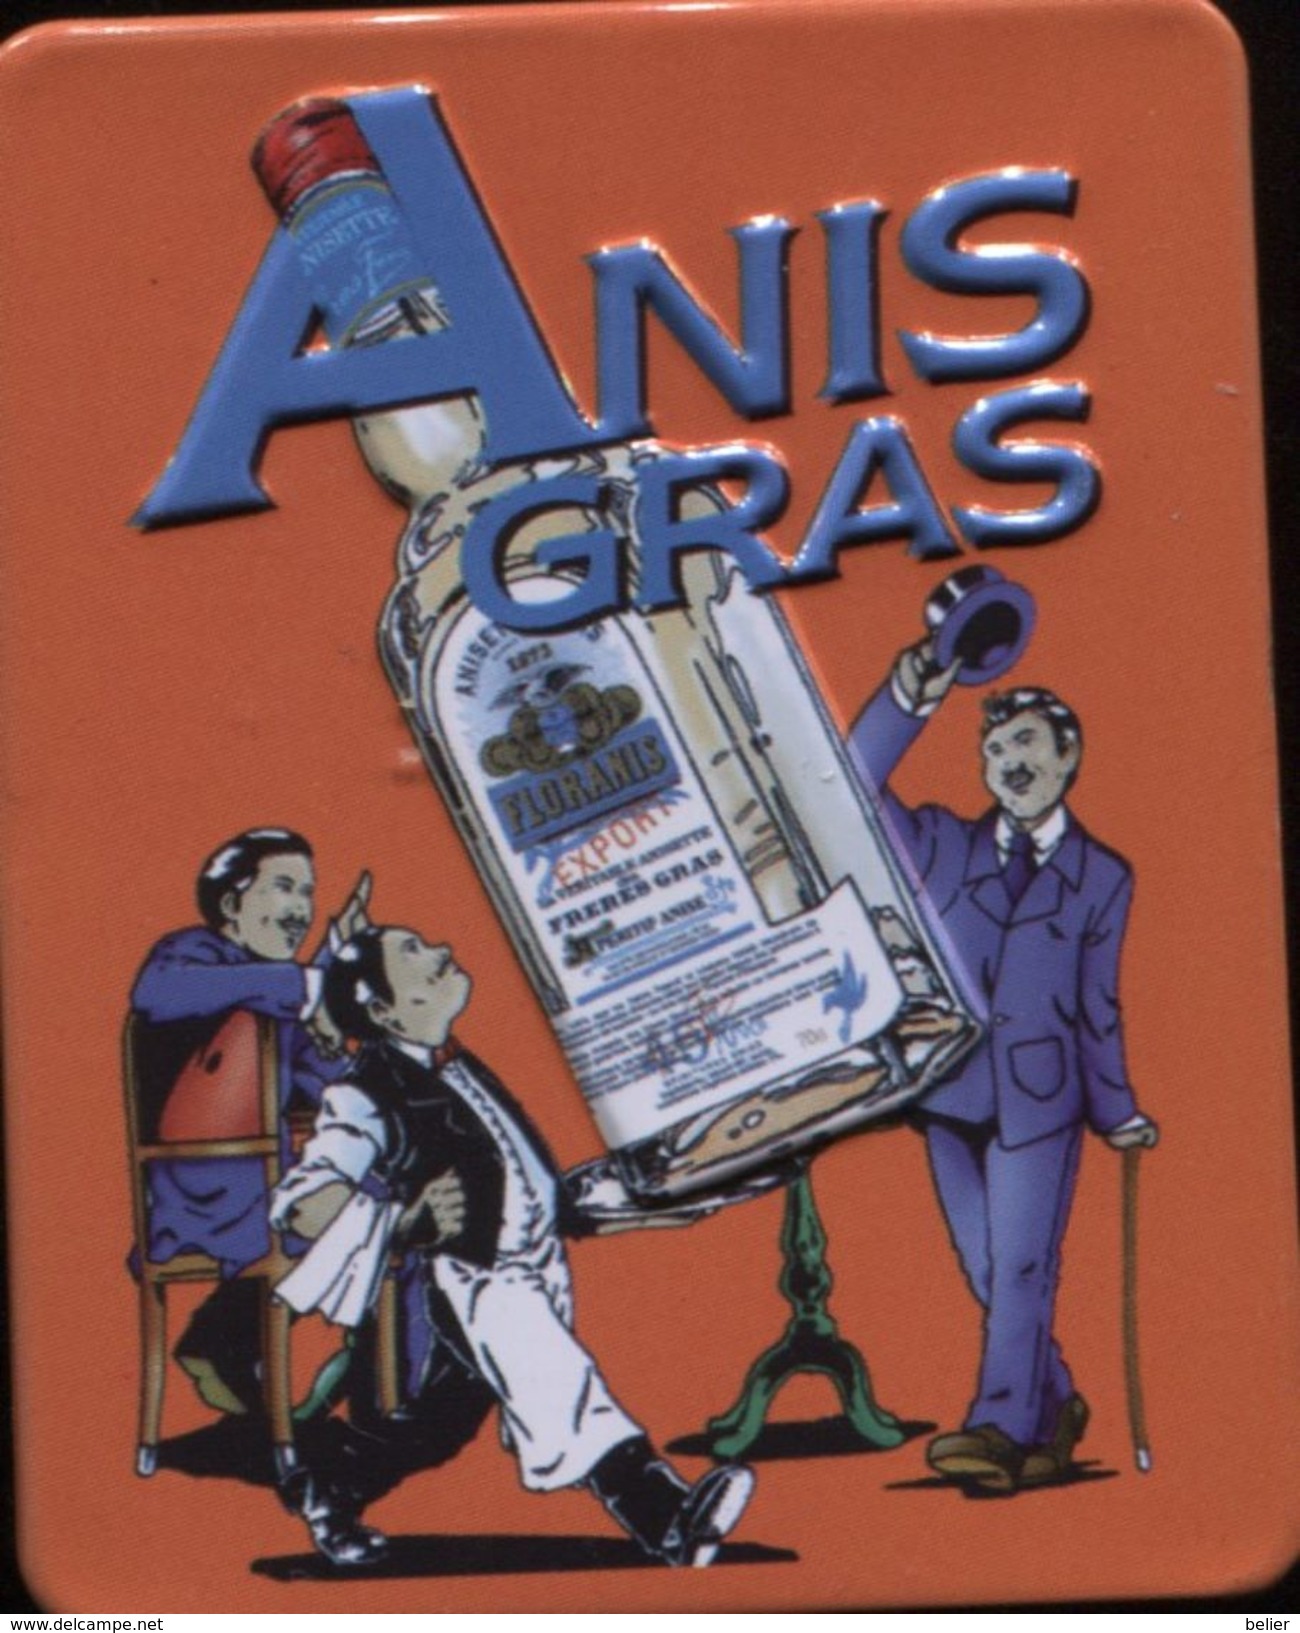 MAGNET ANIS GRAS - Magnets